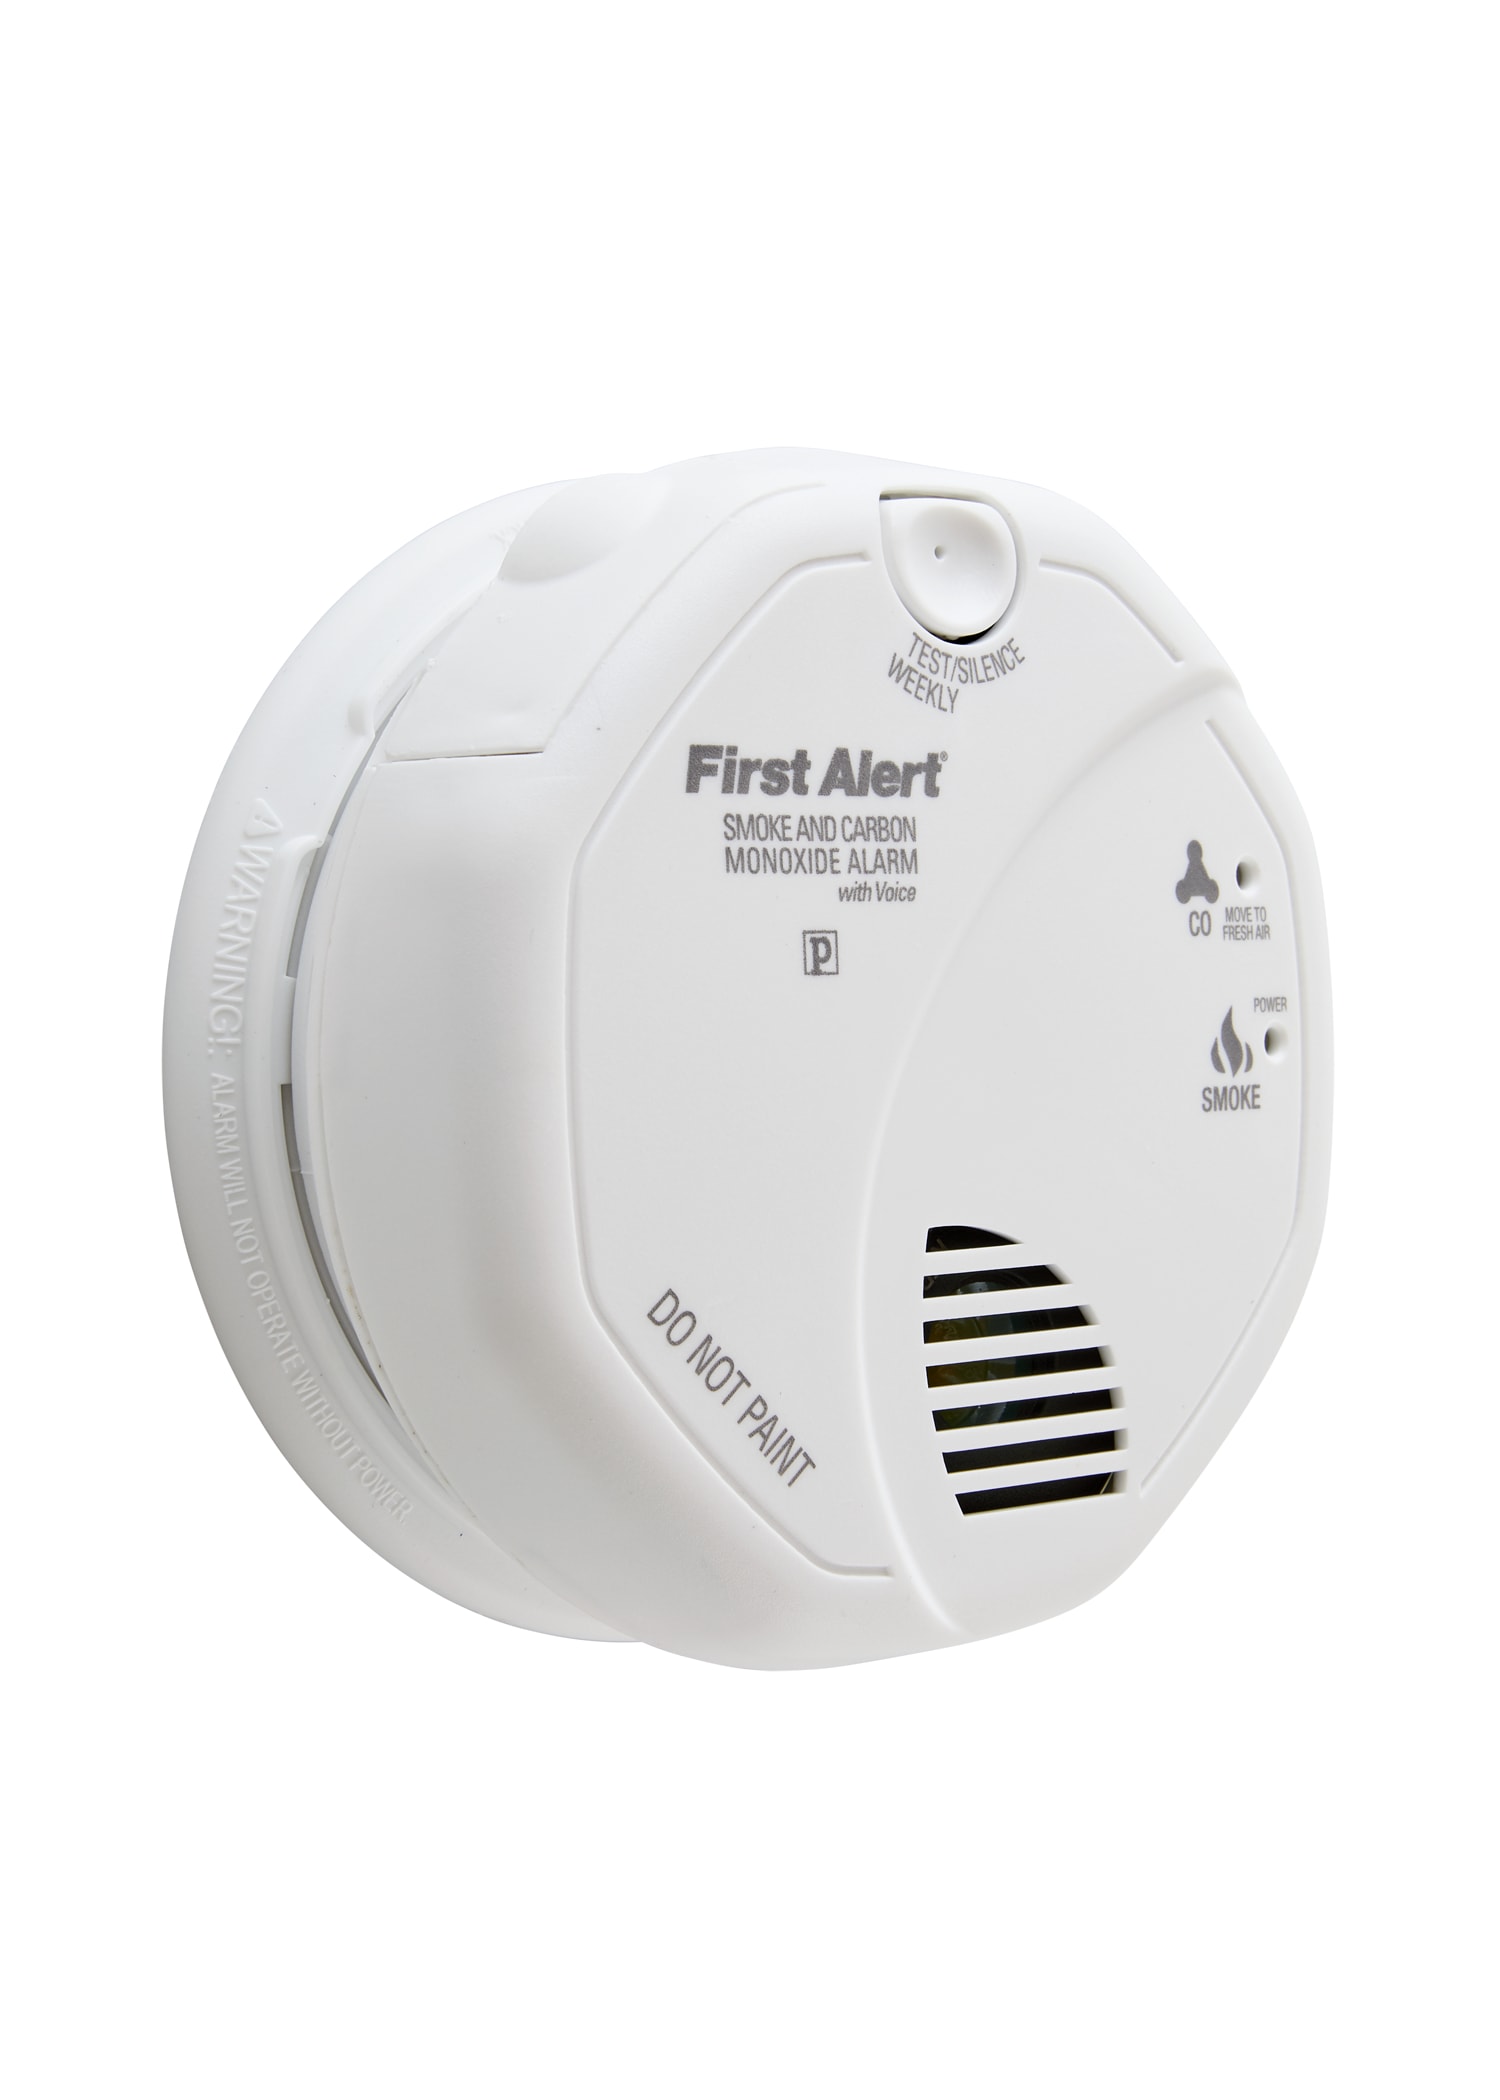 Smoke and CO Alarm, Battery Operated - image 2 of 5